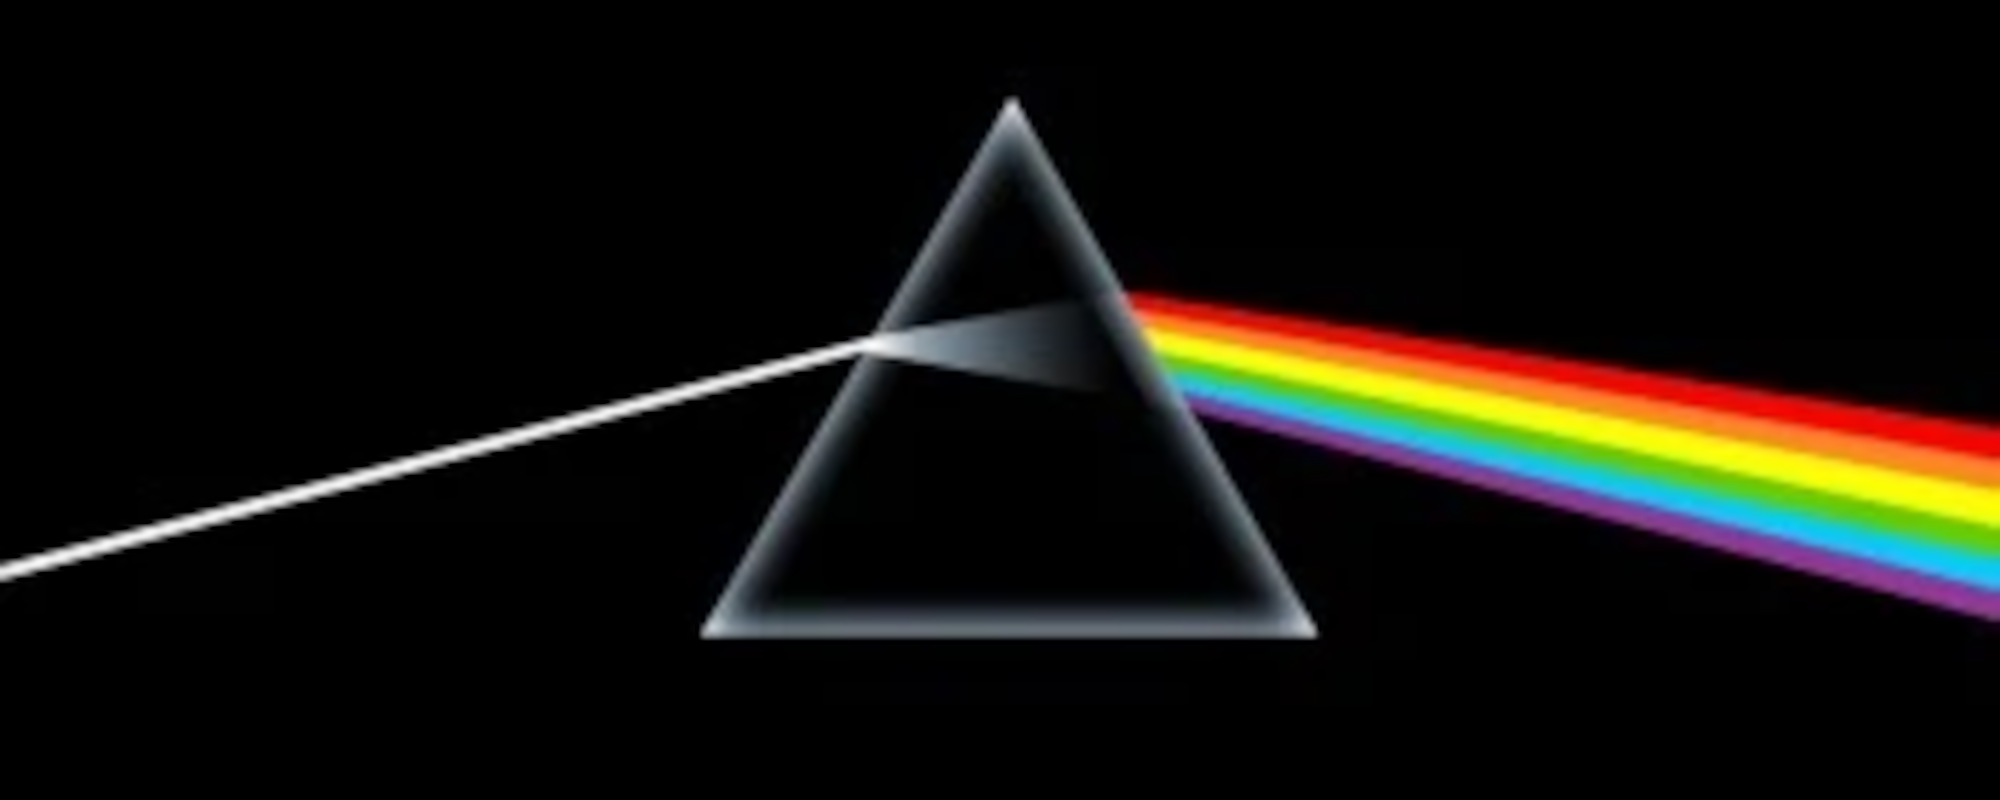 The Story Behind the Album Cover: Pink Floyd’s ‘The Dark Side of the Moon’